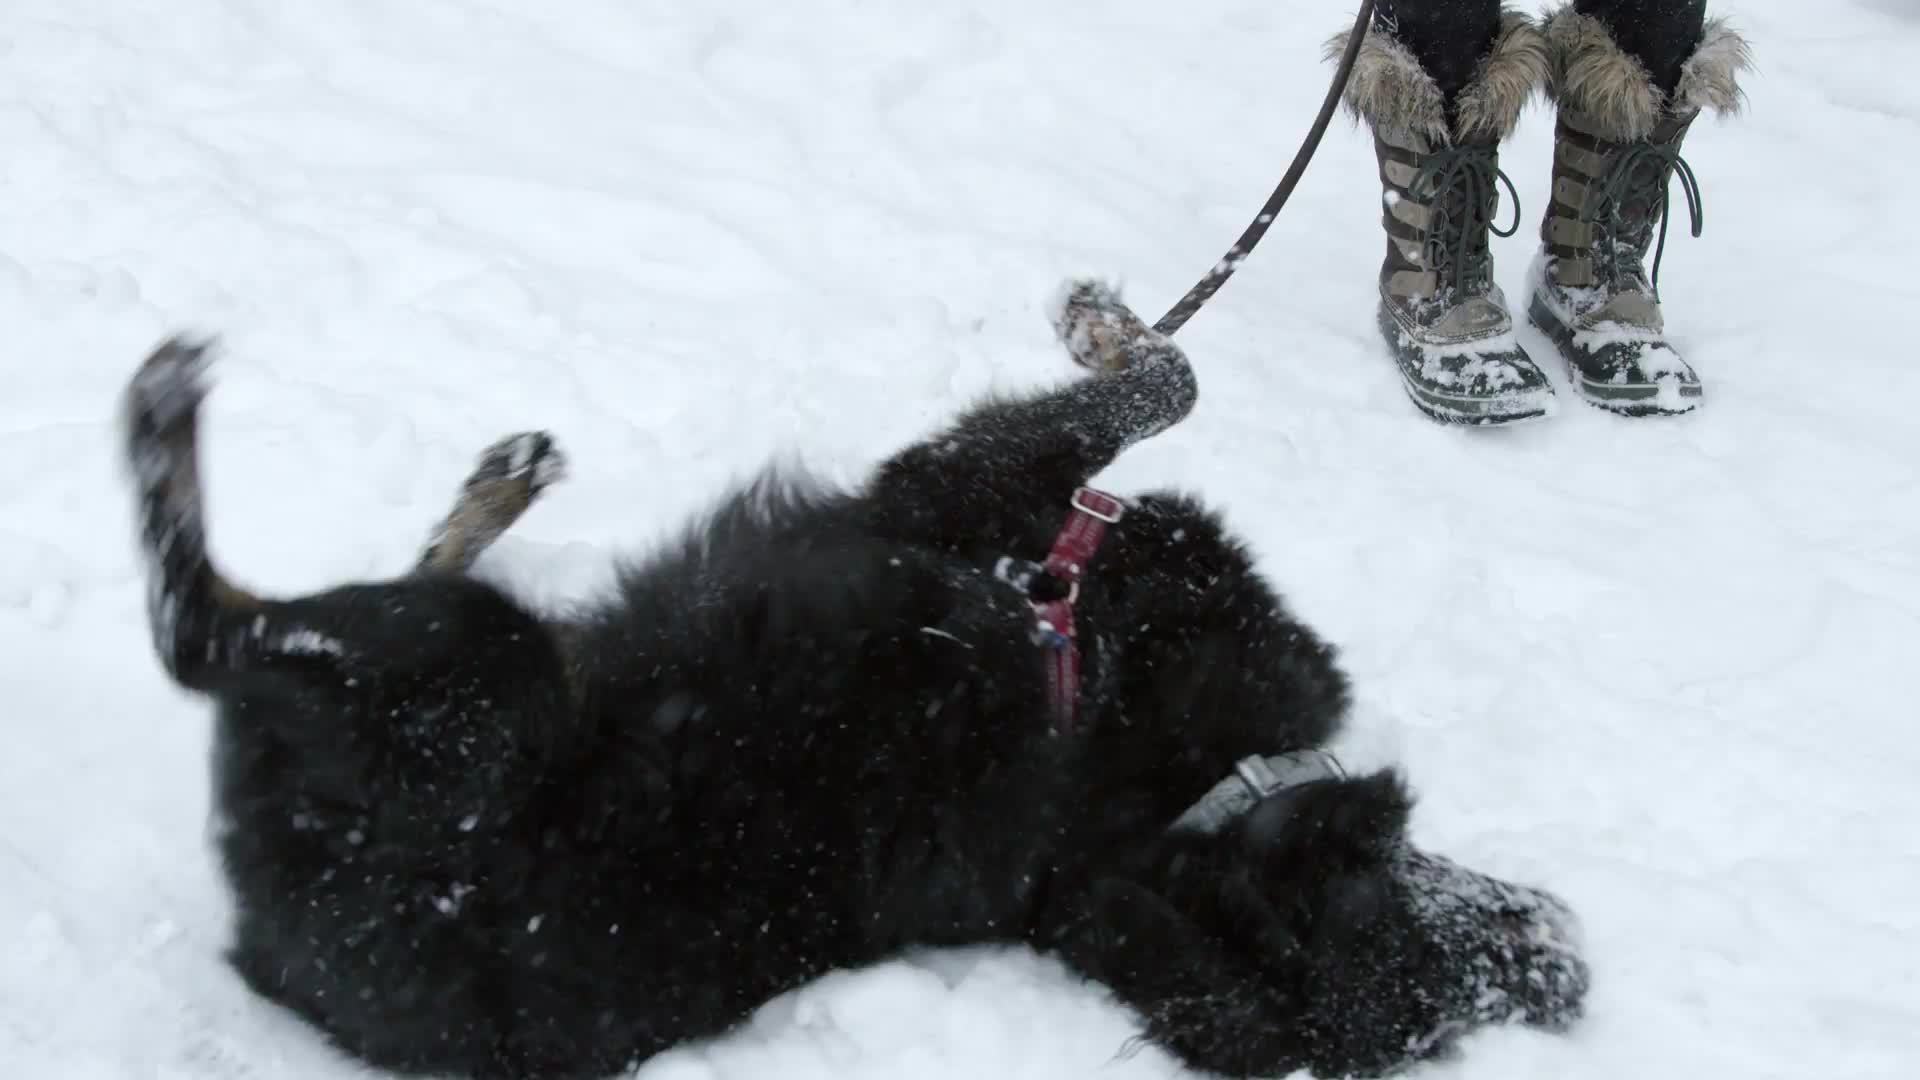 black dog rolling around in snow in slow motion in Washington Square Park during snow storm blizzard snowing in winter